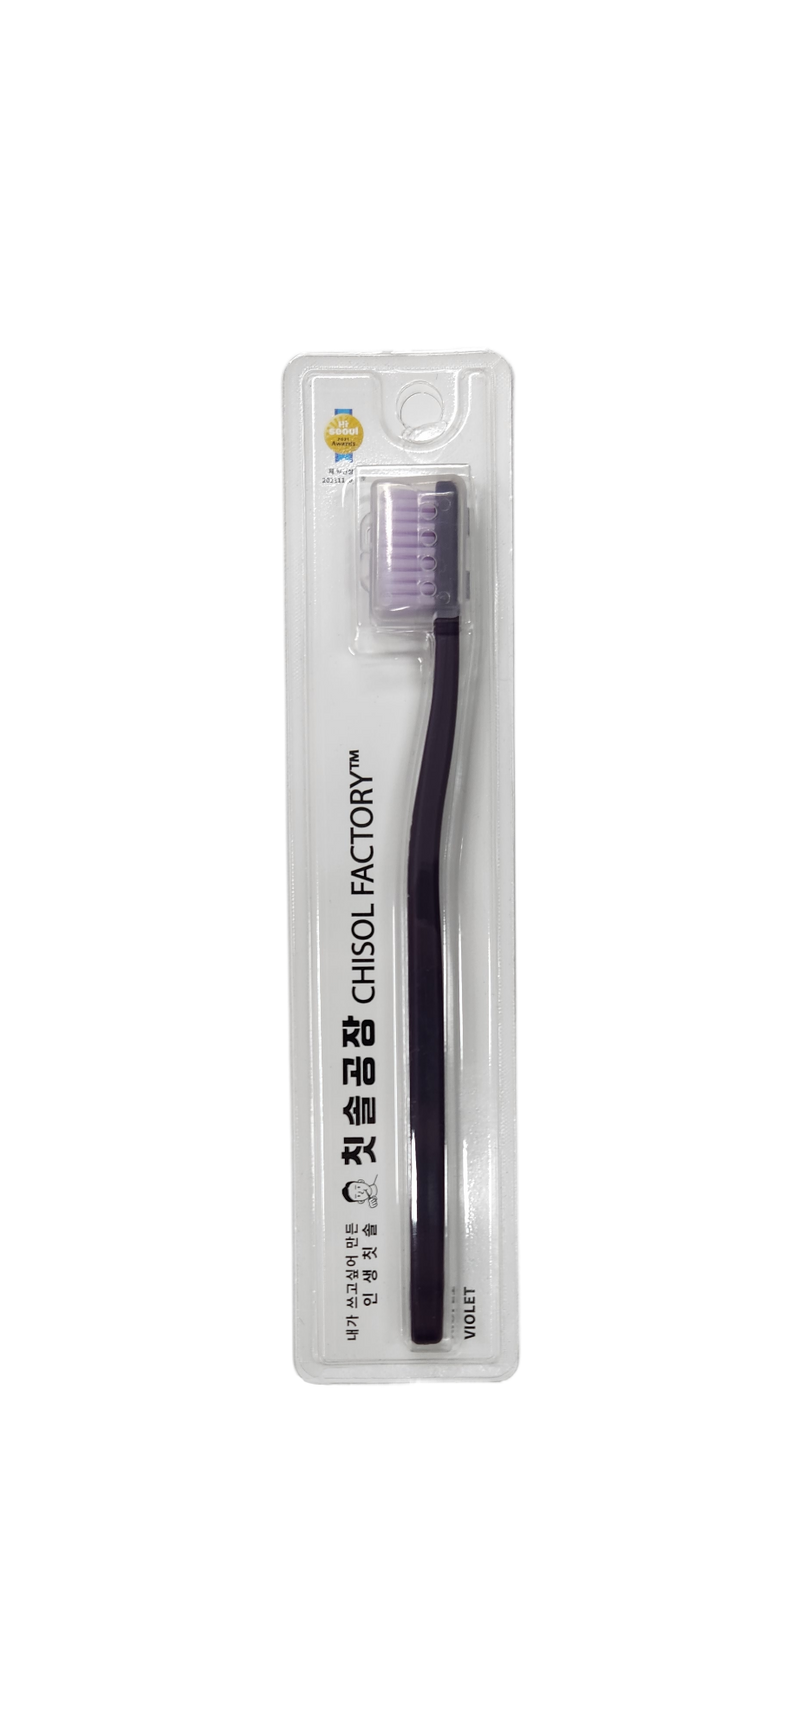 Chisol Factory Toothbrush 0.18mm Bristle